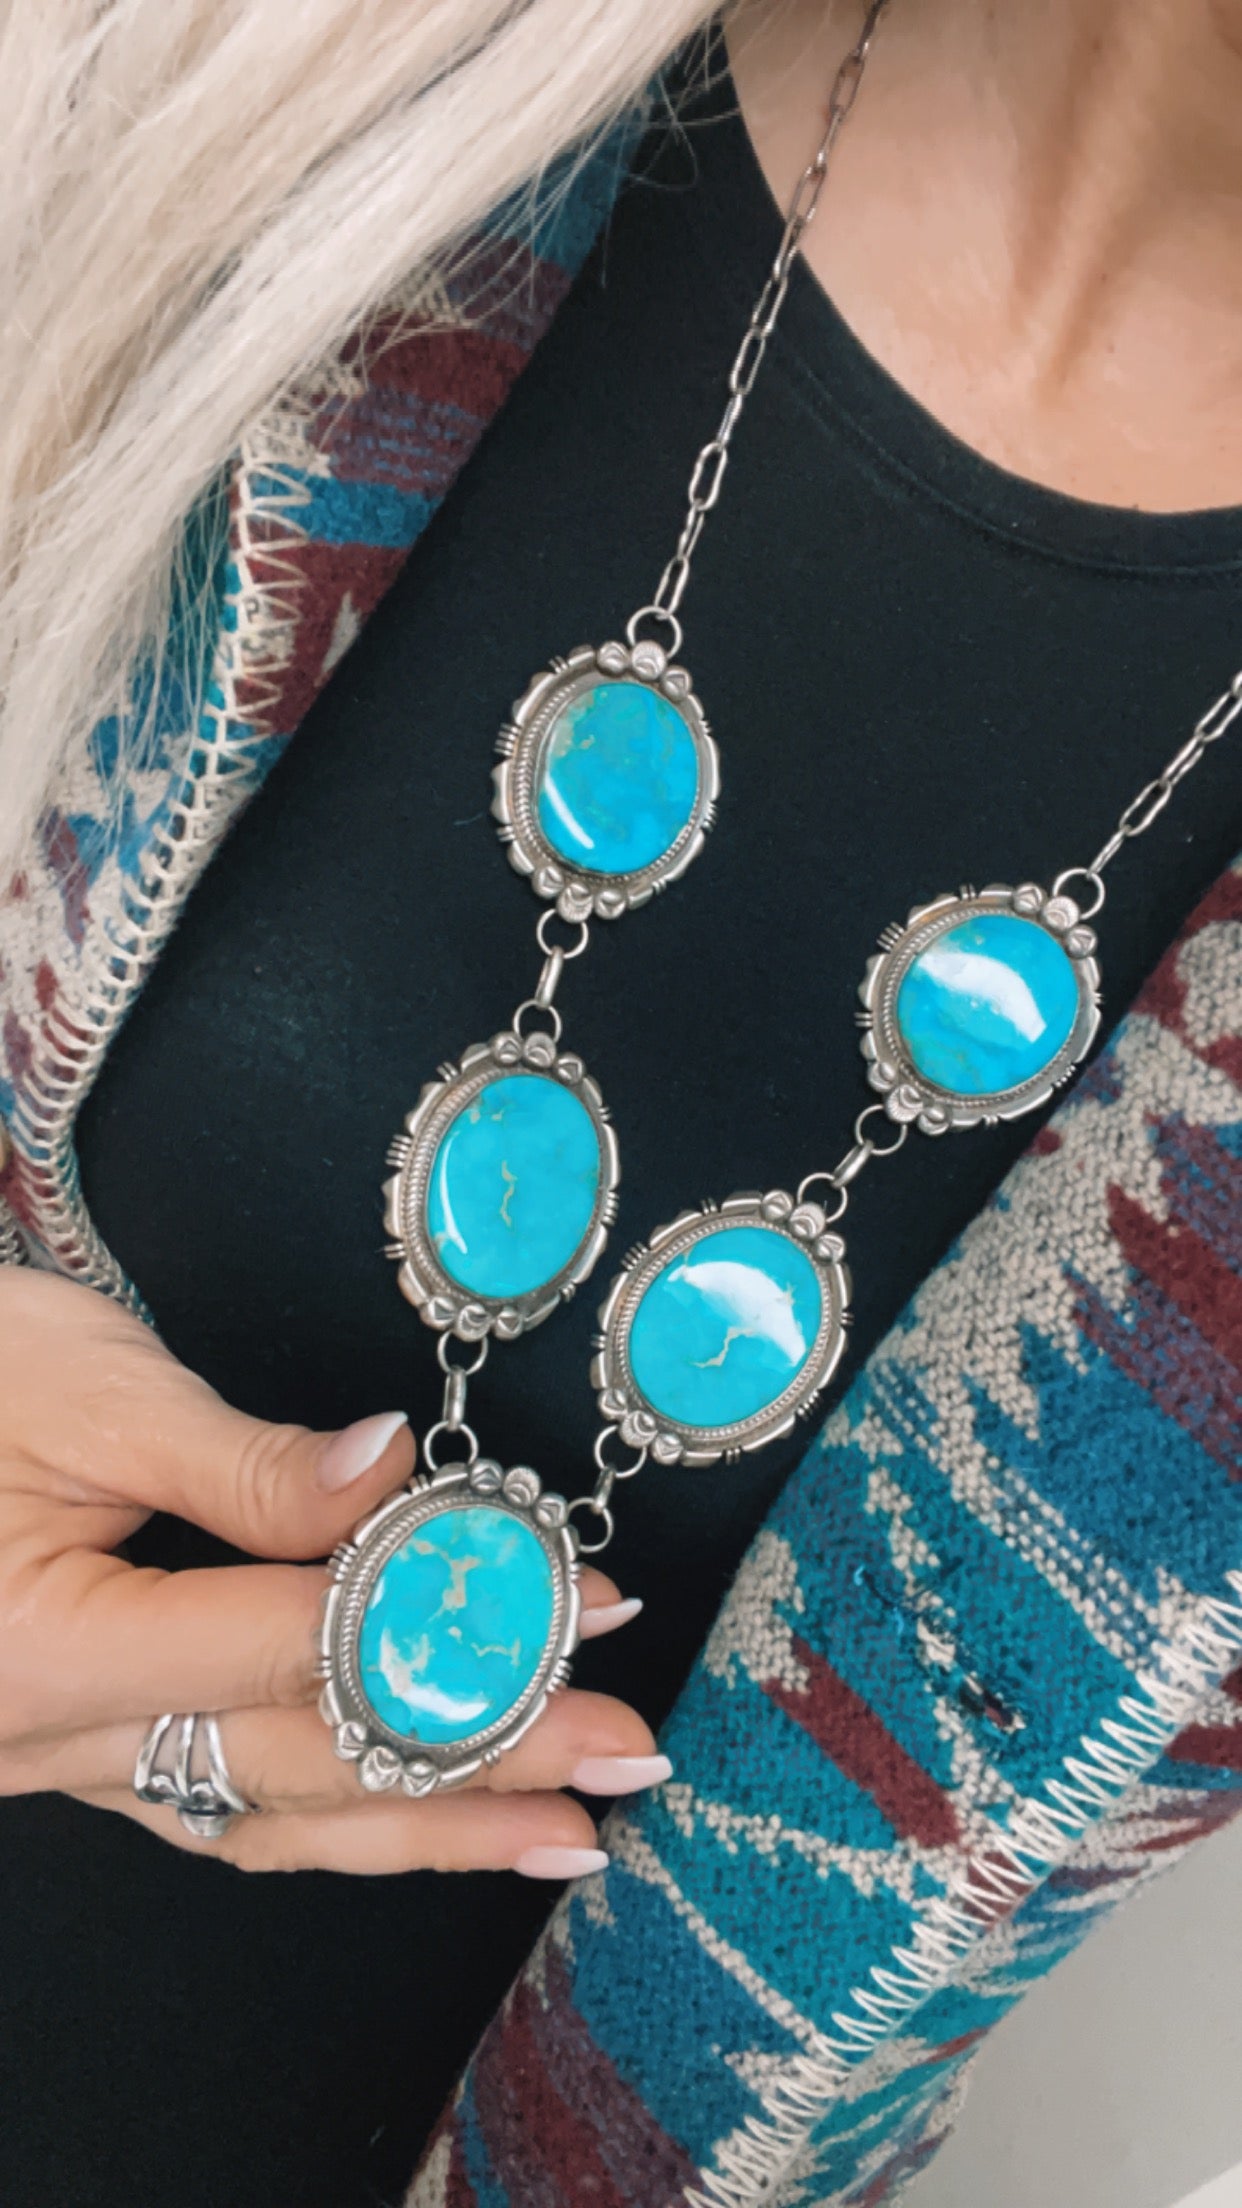 The most beautiful turquoise stones! Necklace and earrings set